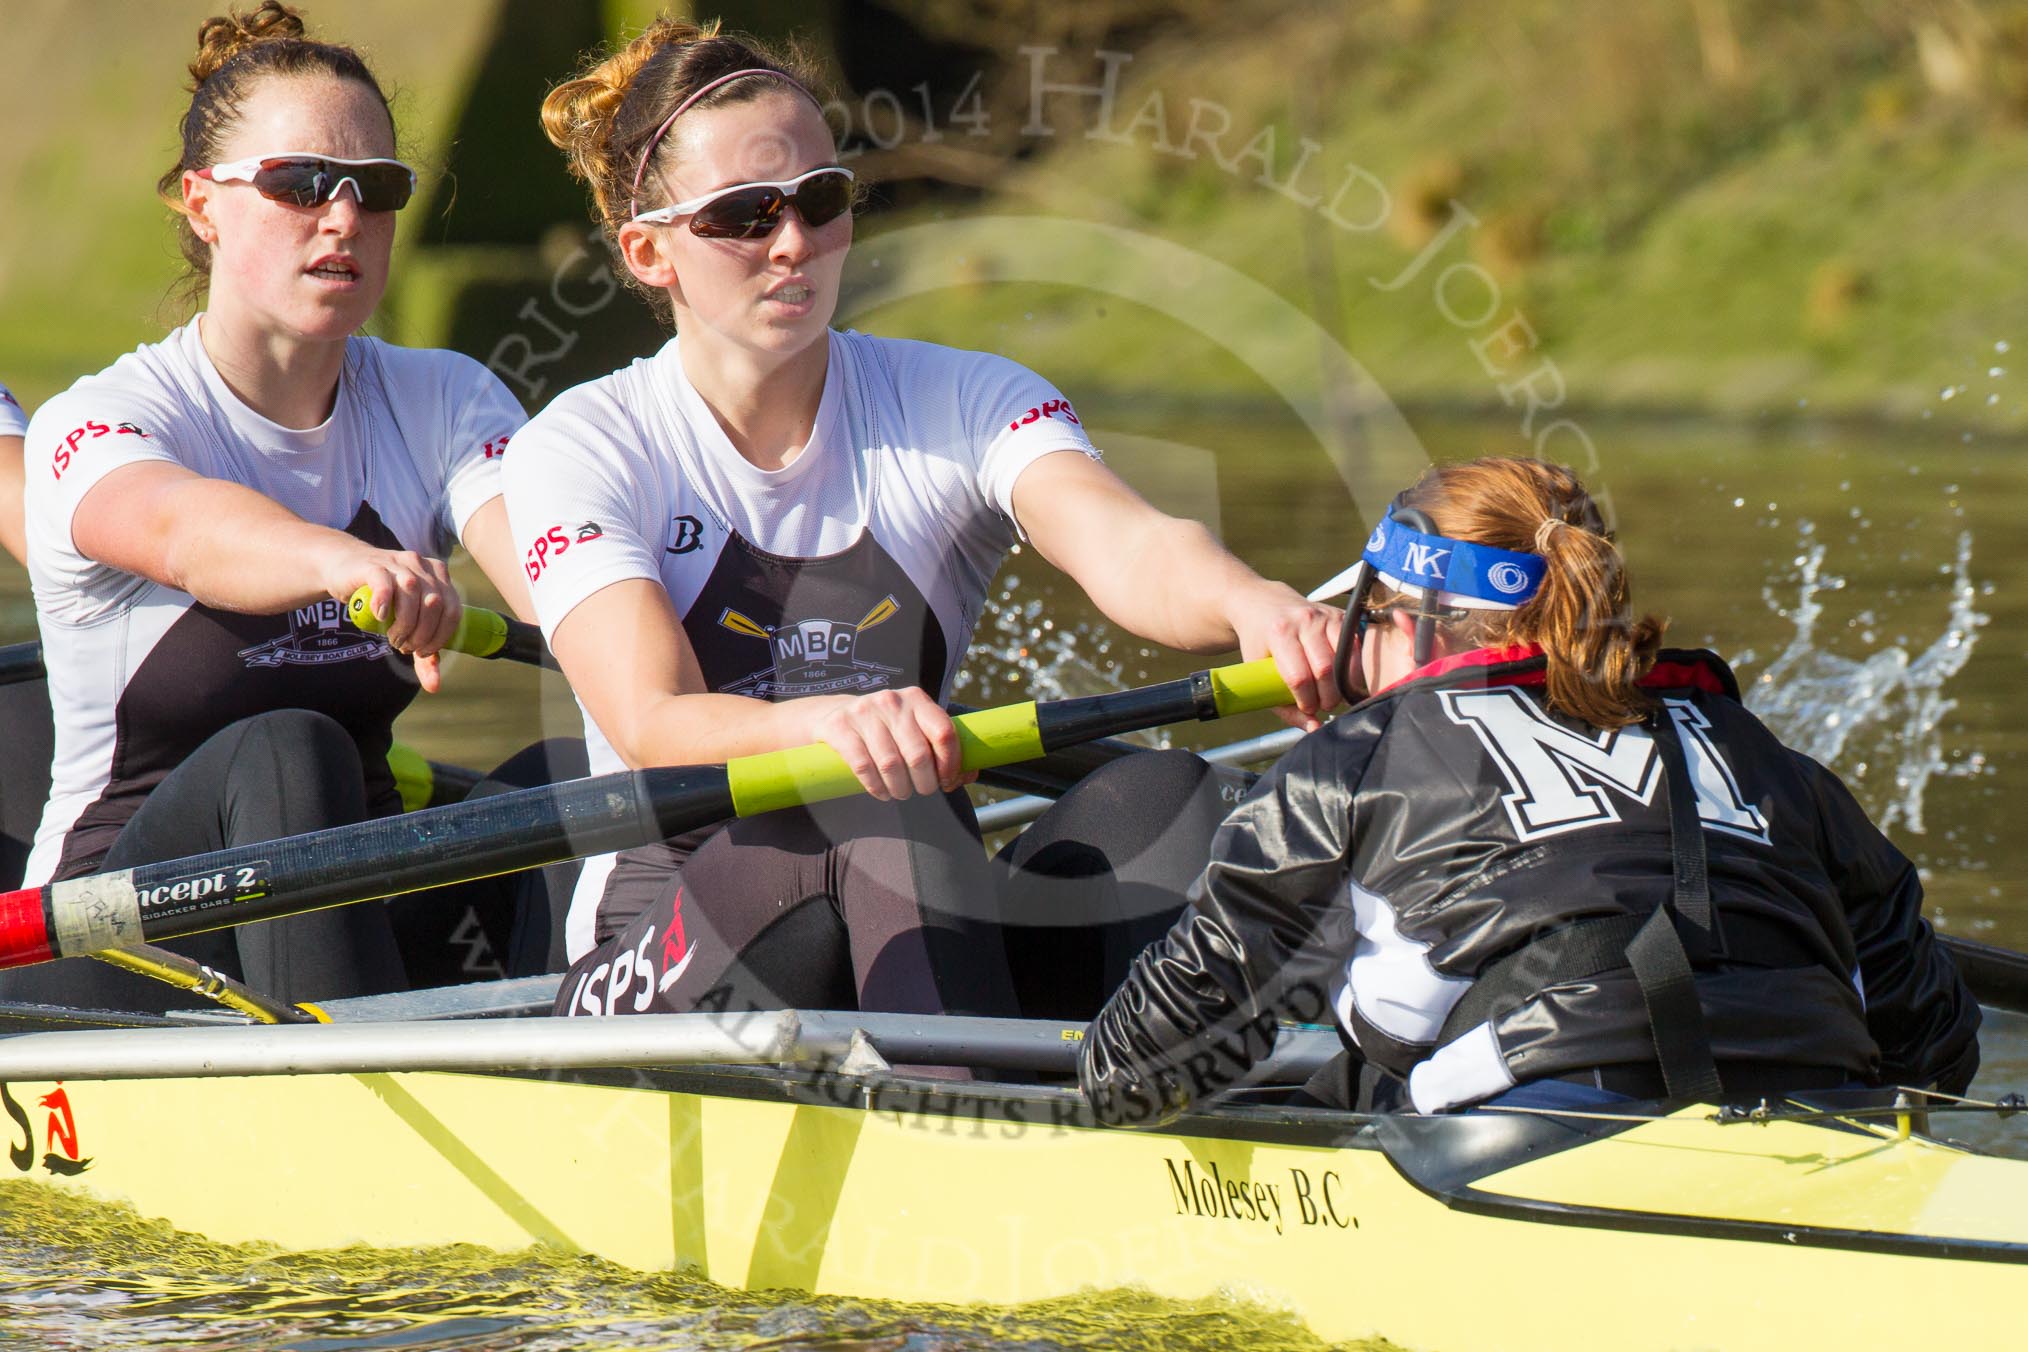 The Boat Race season 2014 - fixture OUWBC vs Molesey BC.




on 01 March 2014 at 13:23, image #245